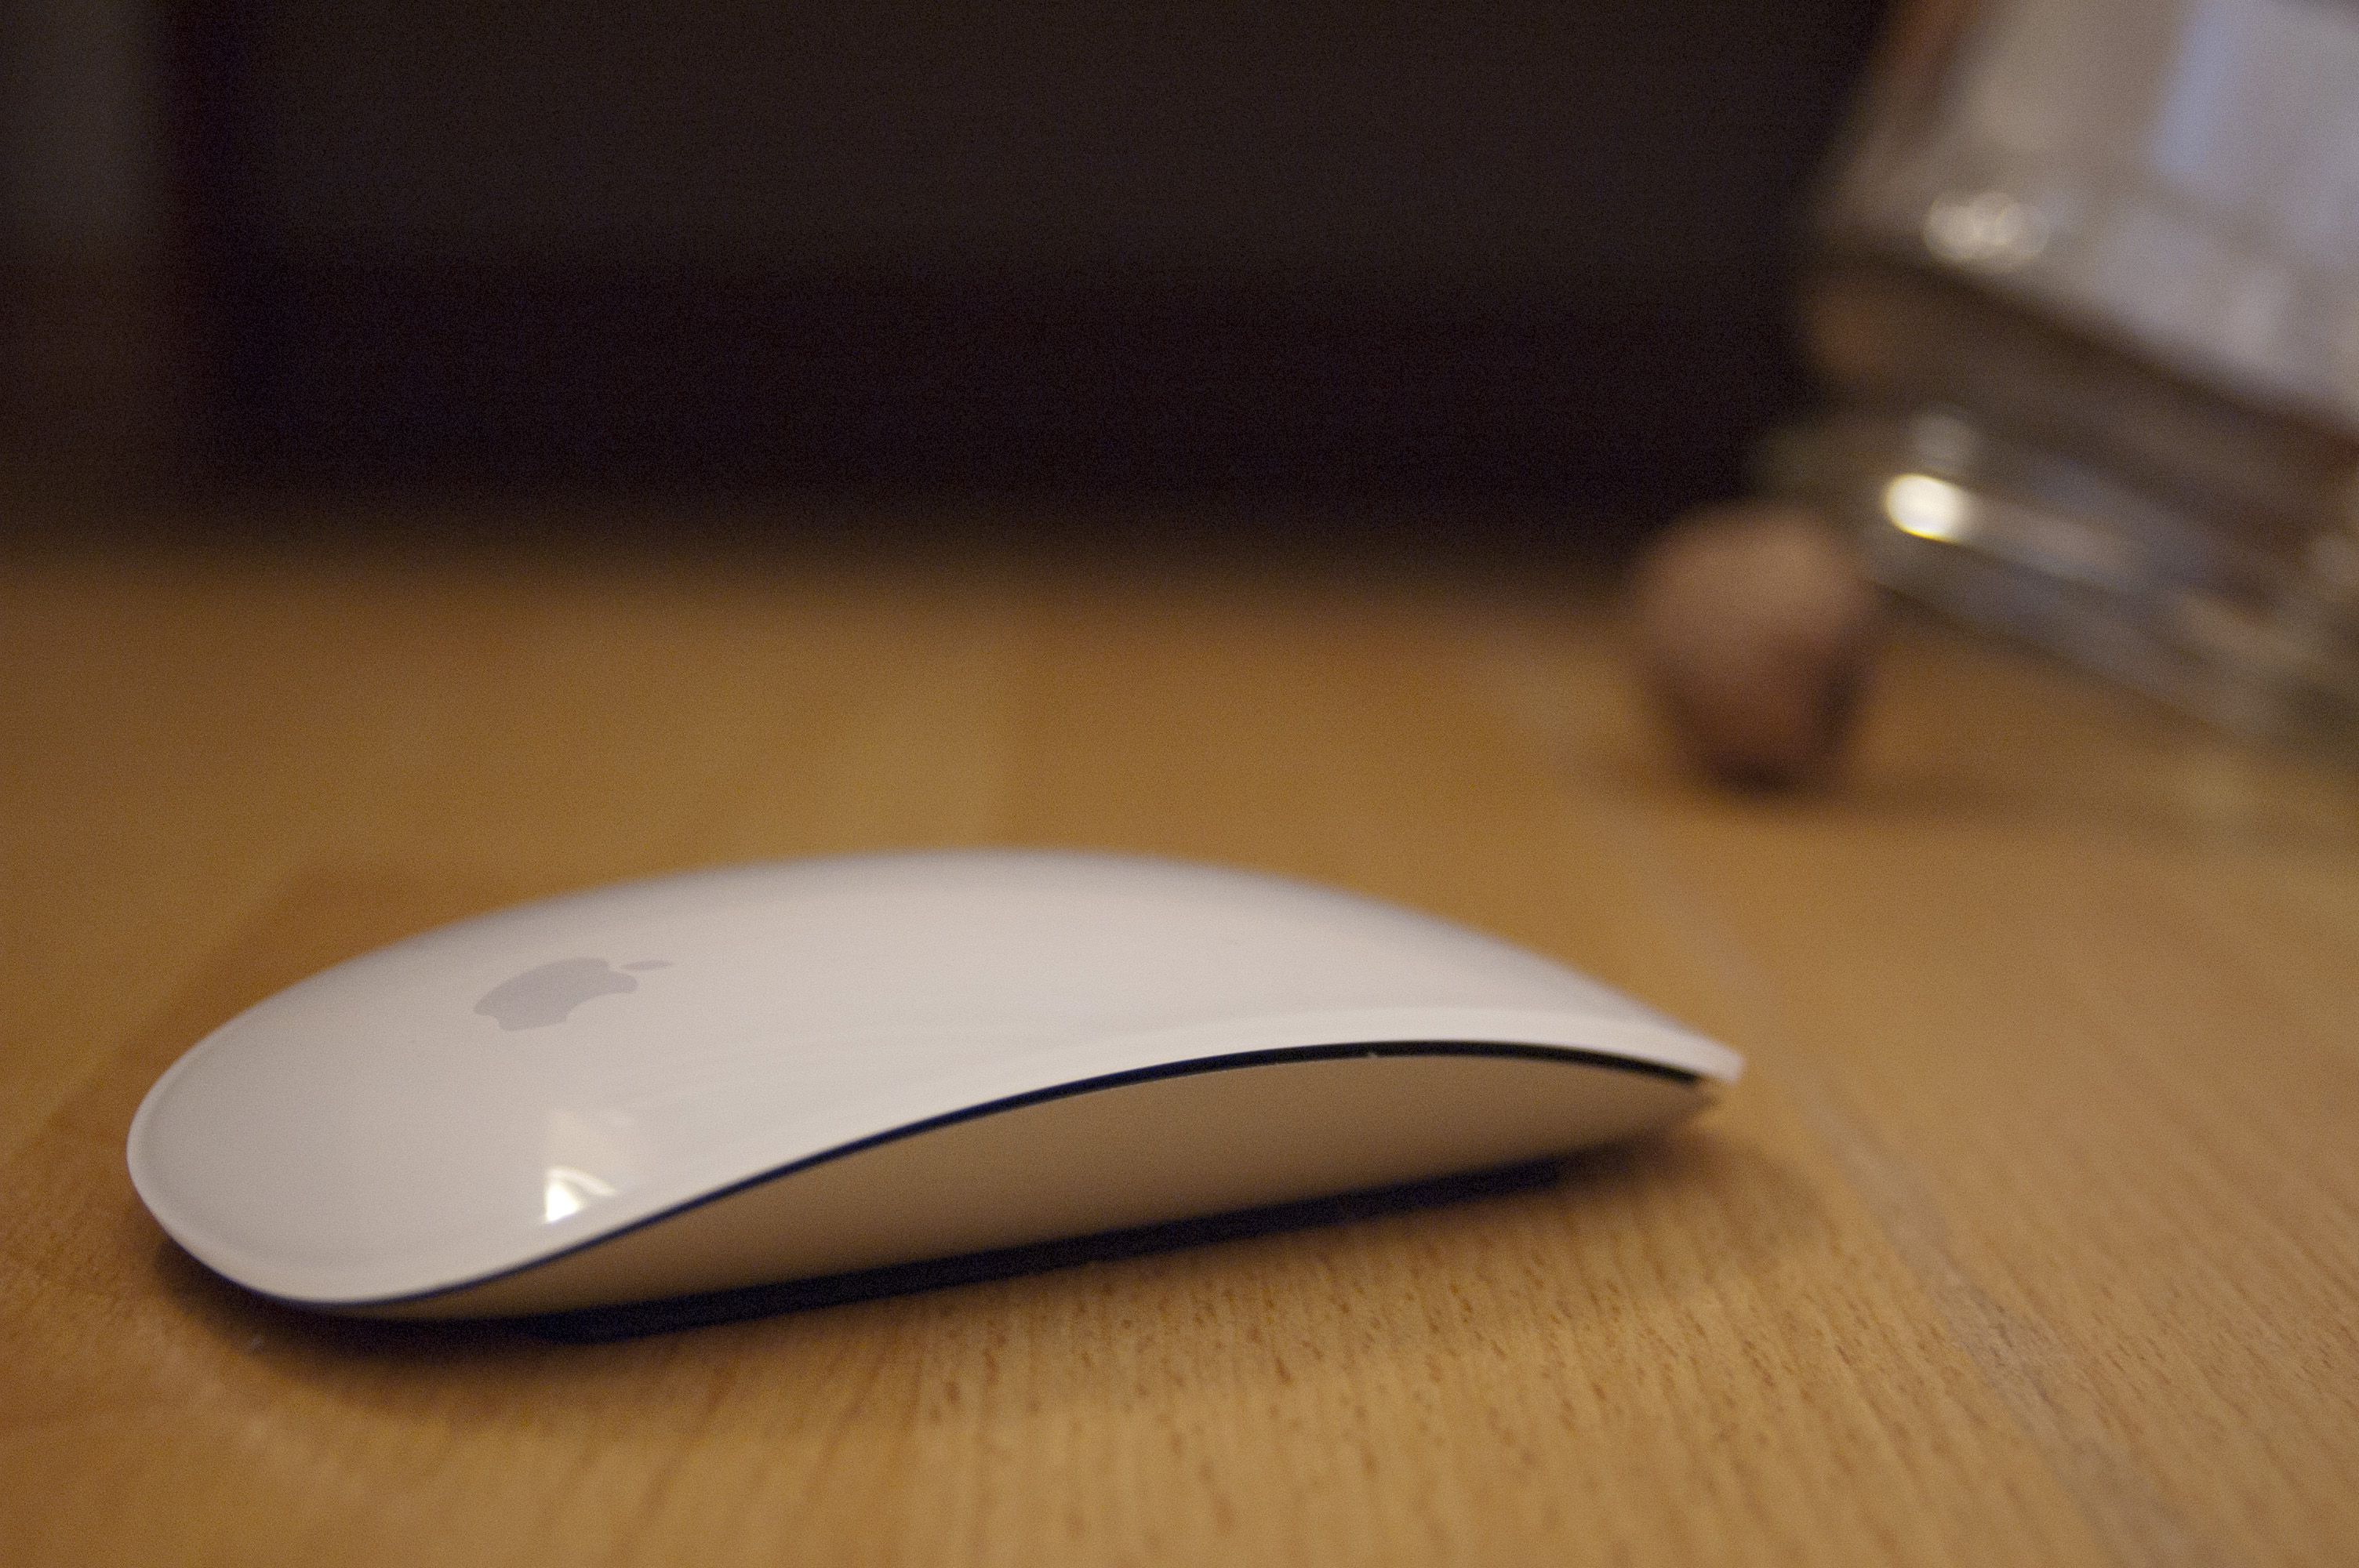 Apple Magic Mouse - Product Review and How to Use